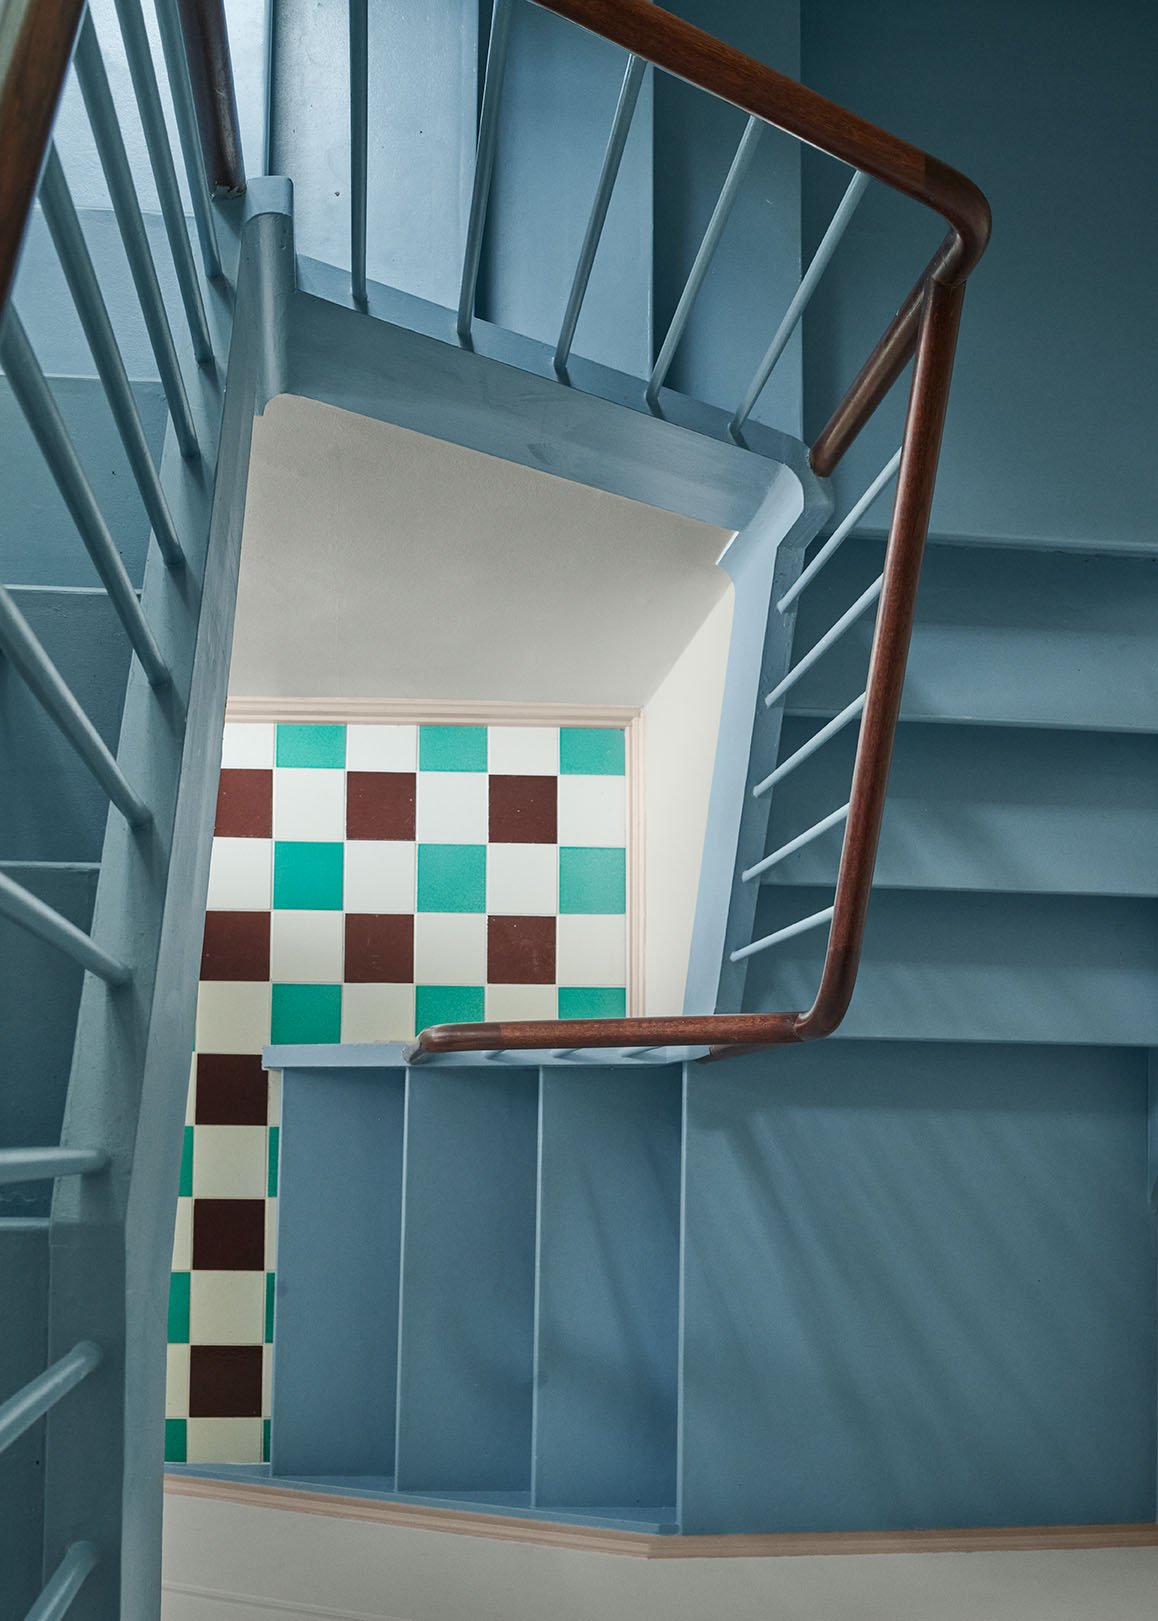 Staircase painted with 'Azure'